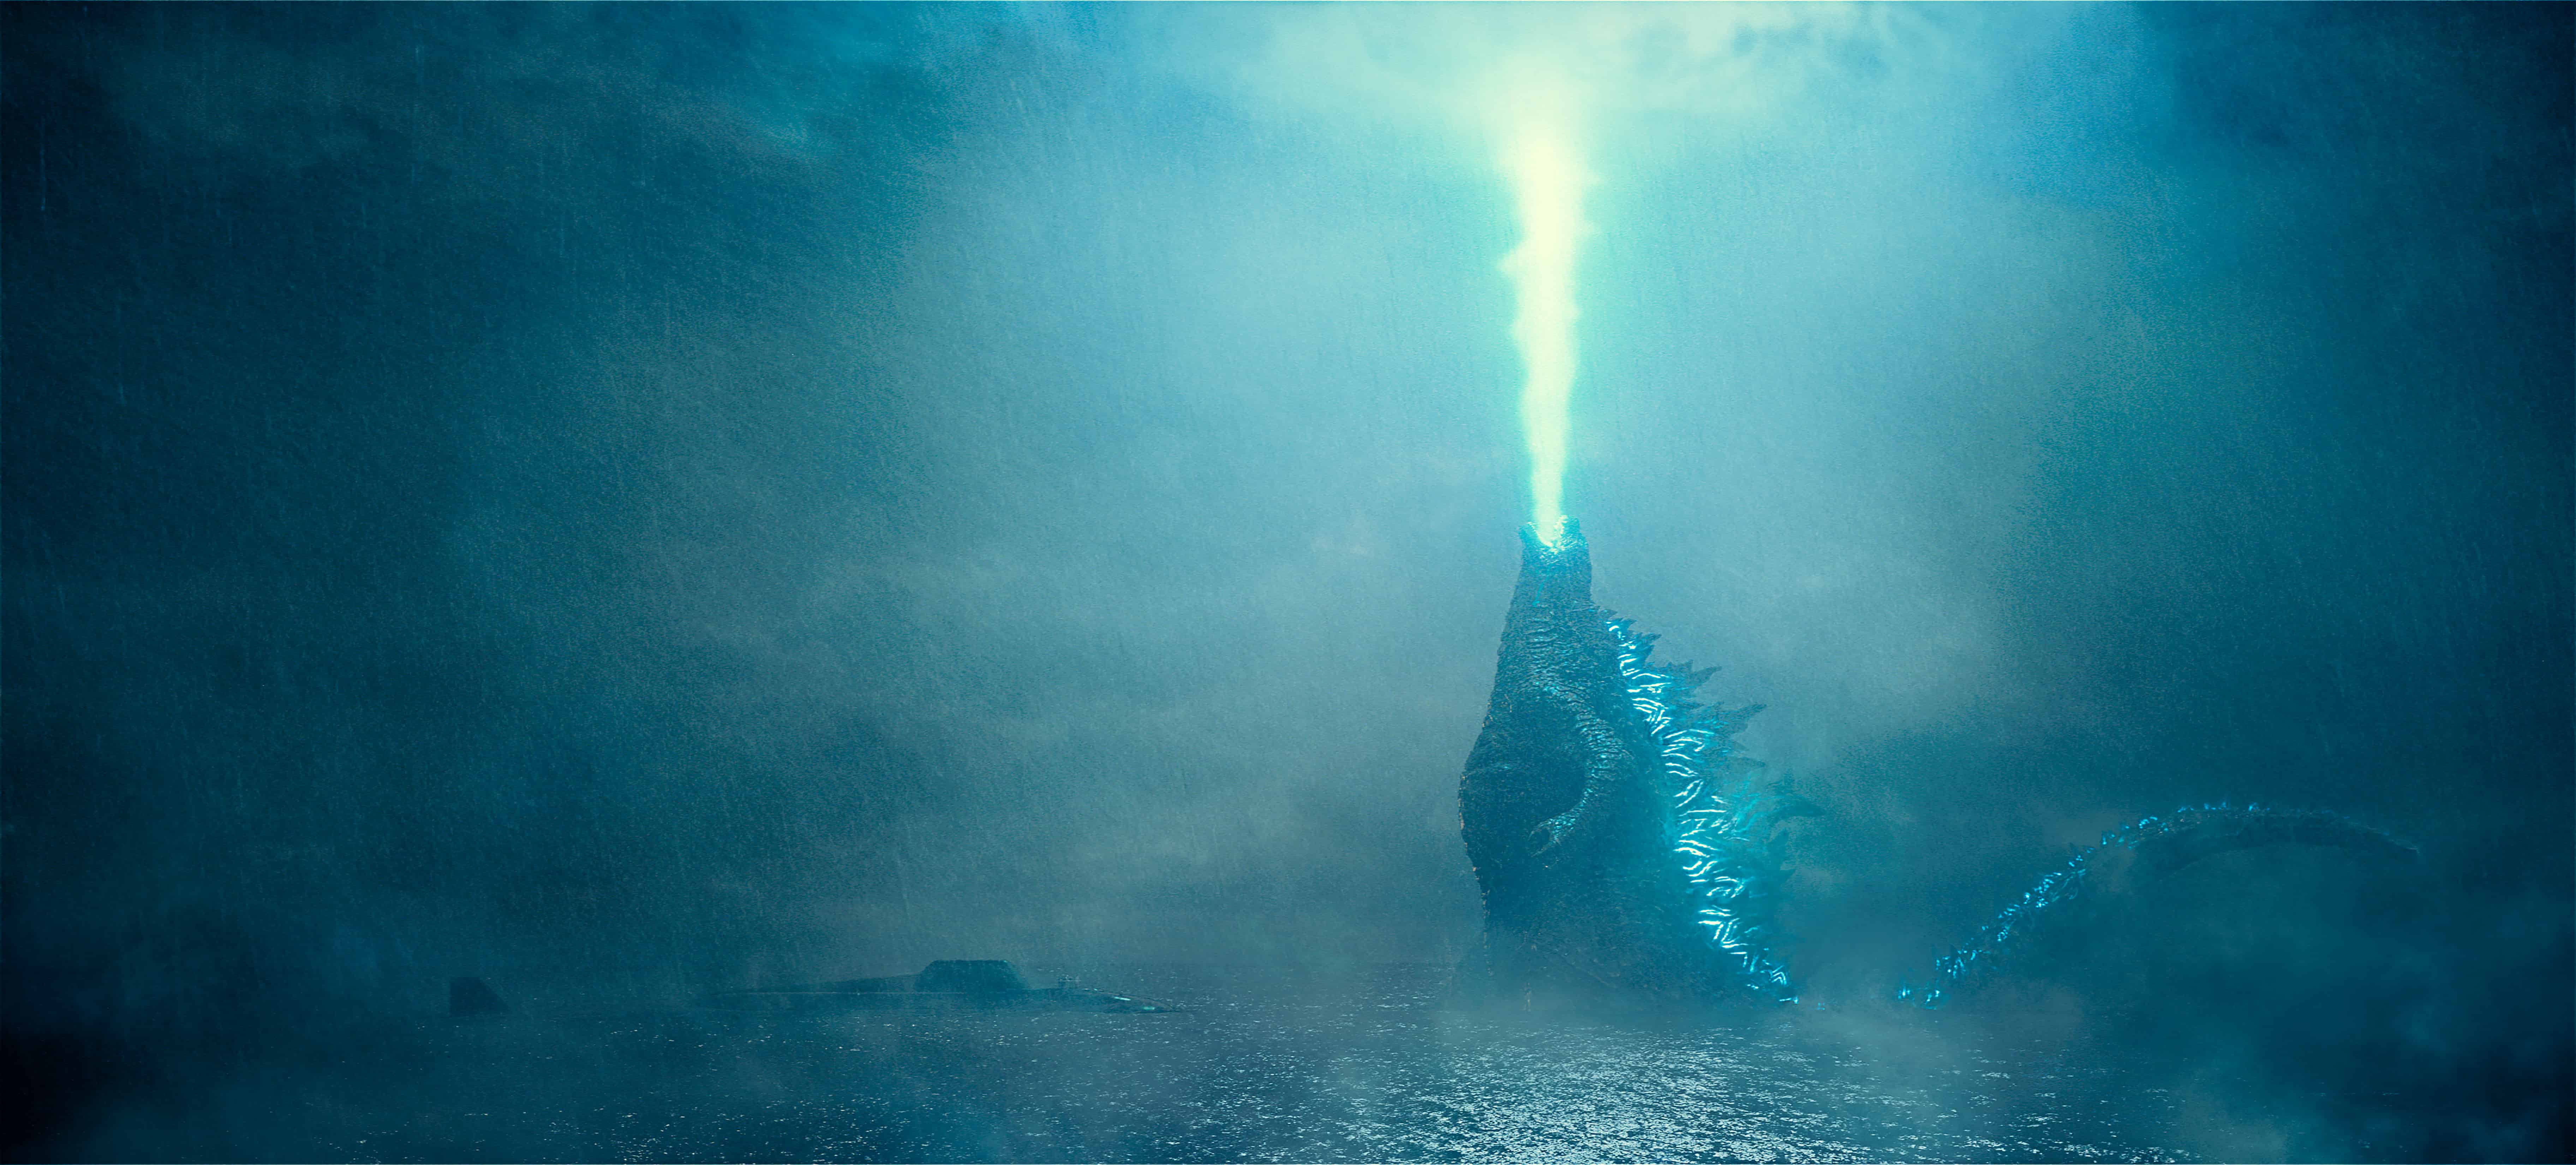 Godzilla II: King Of The Monsters Review